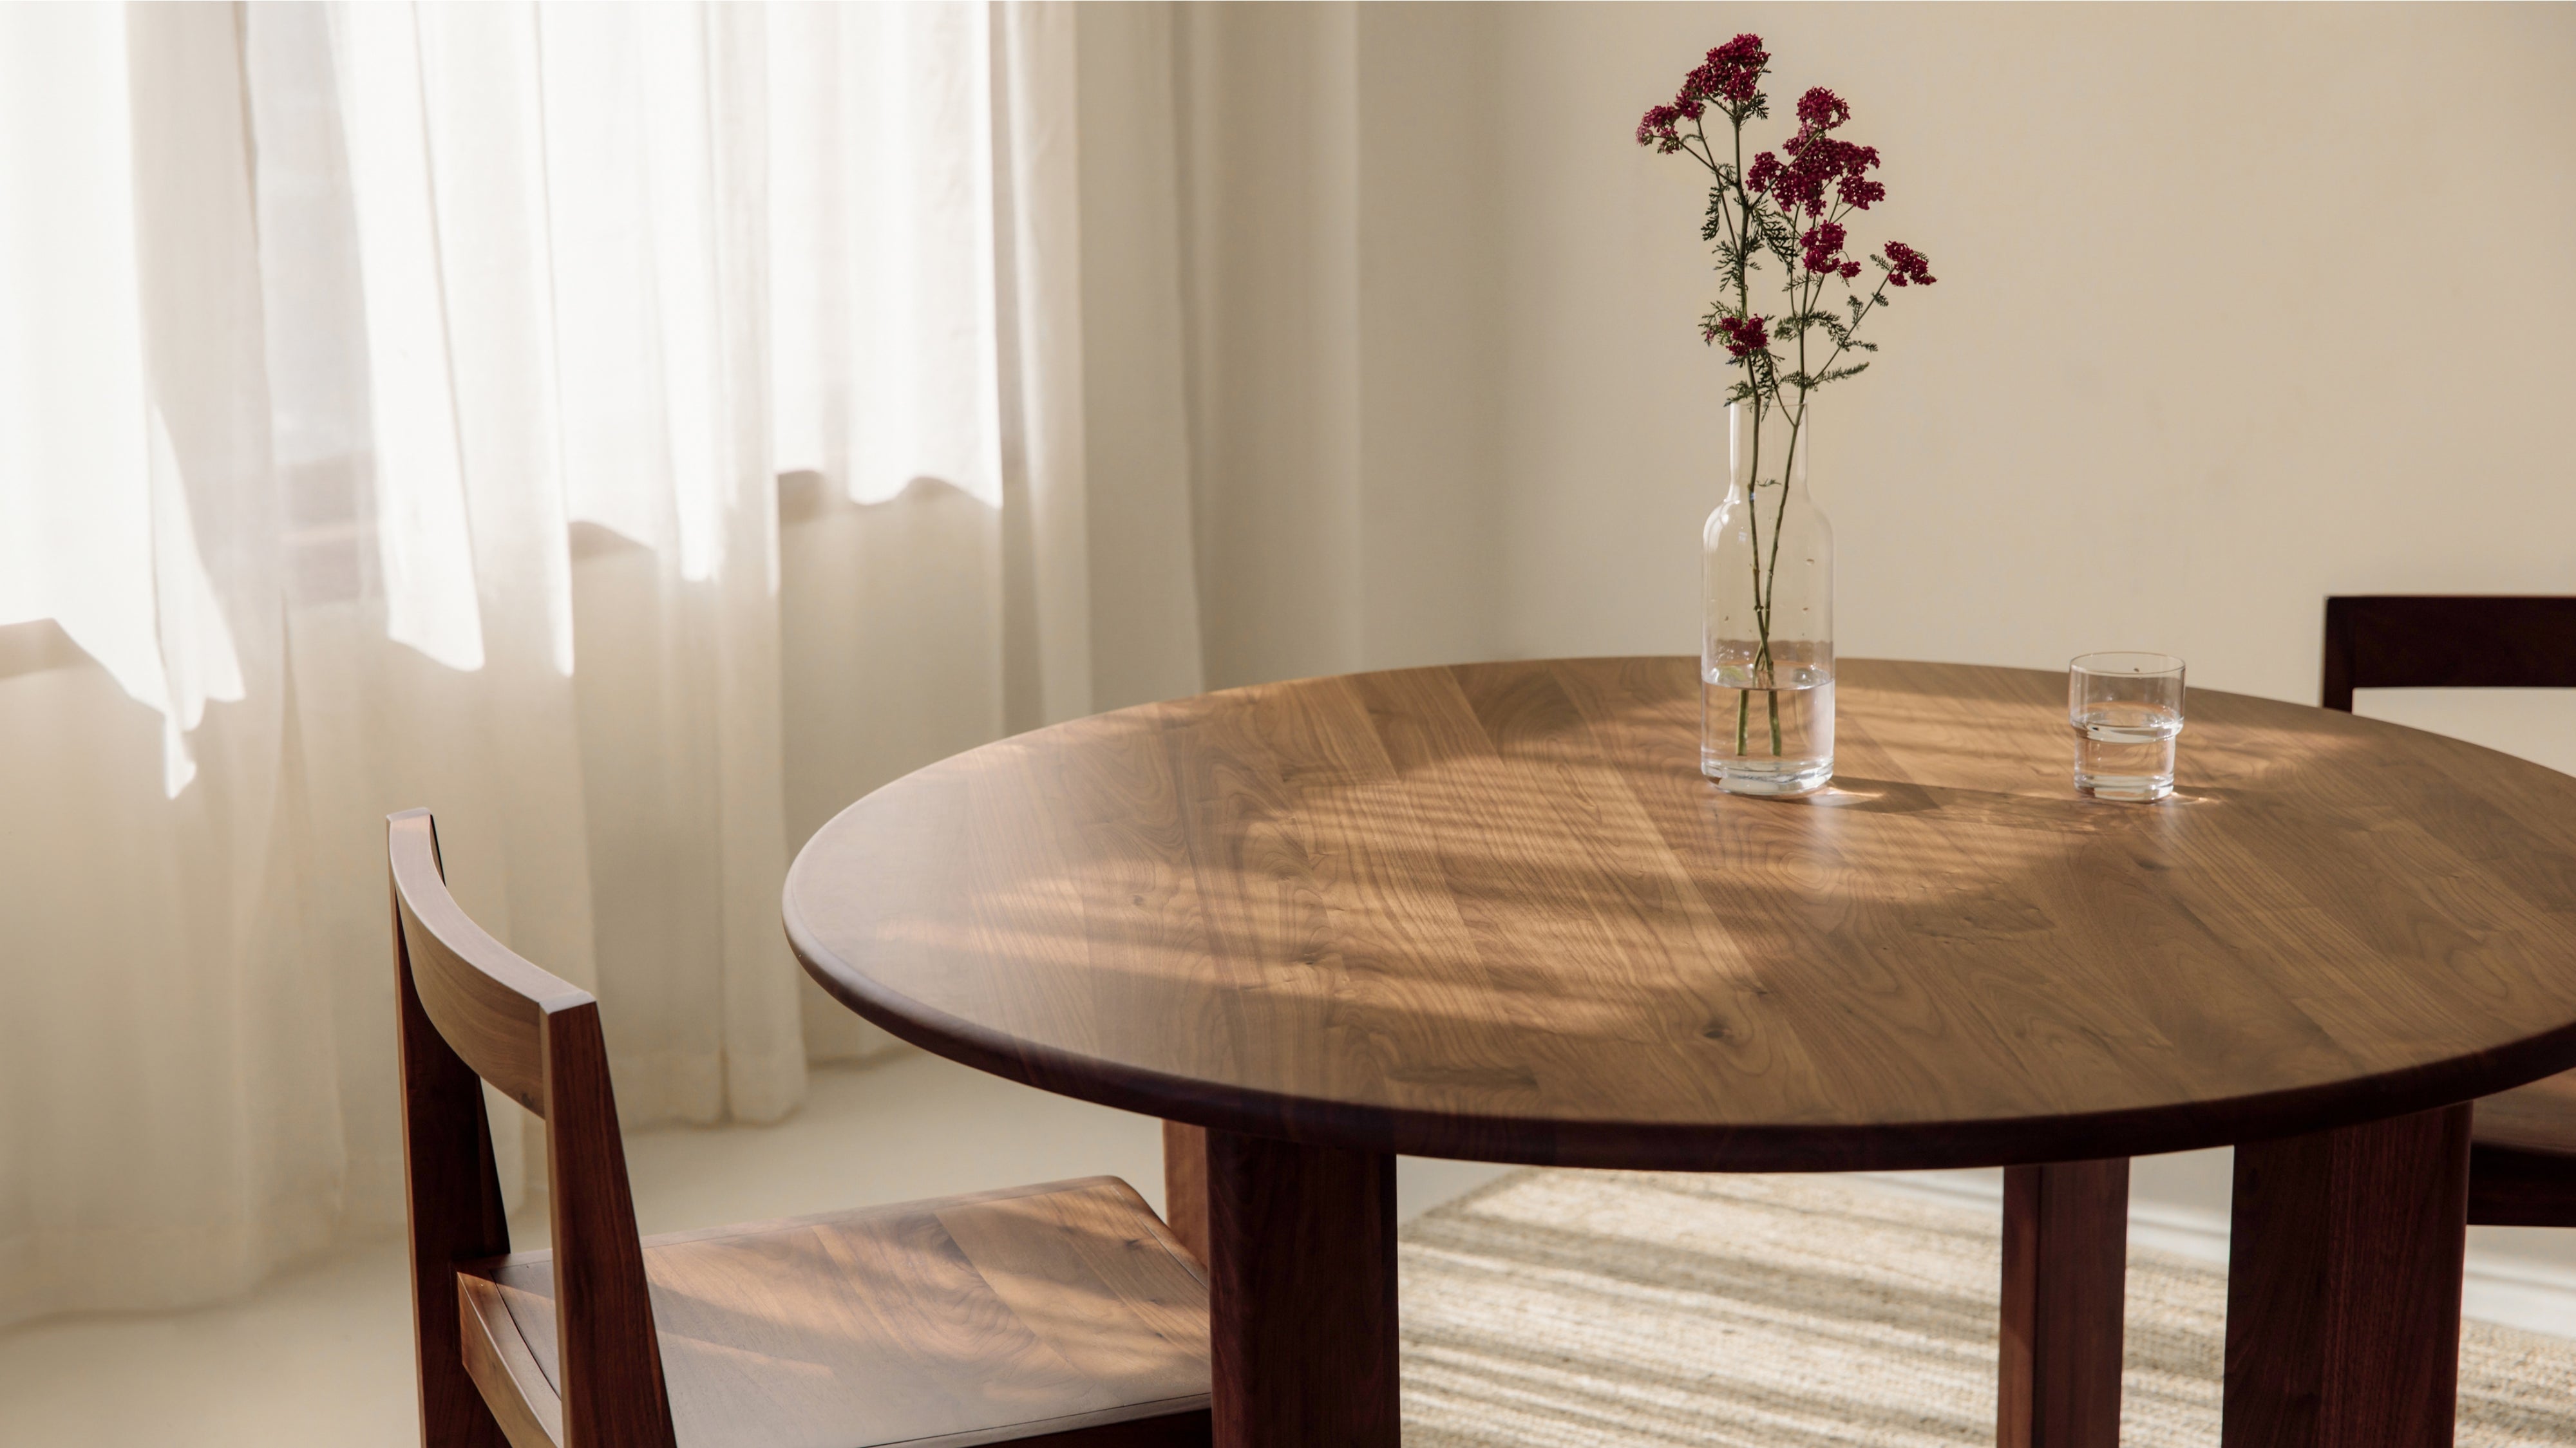 Frame Round Dining Table, Seats 4-5 People, American Walnut - Image 6